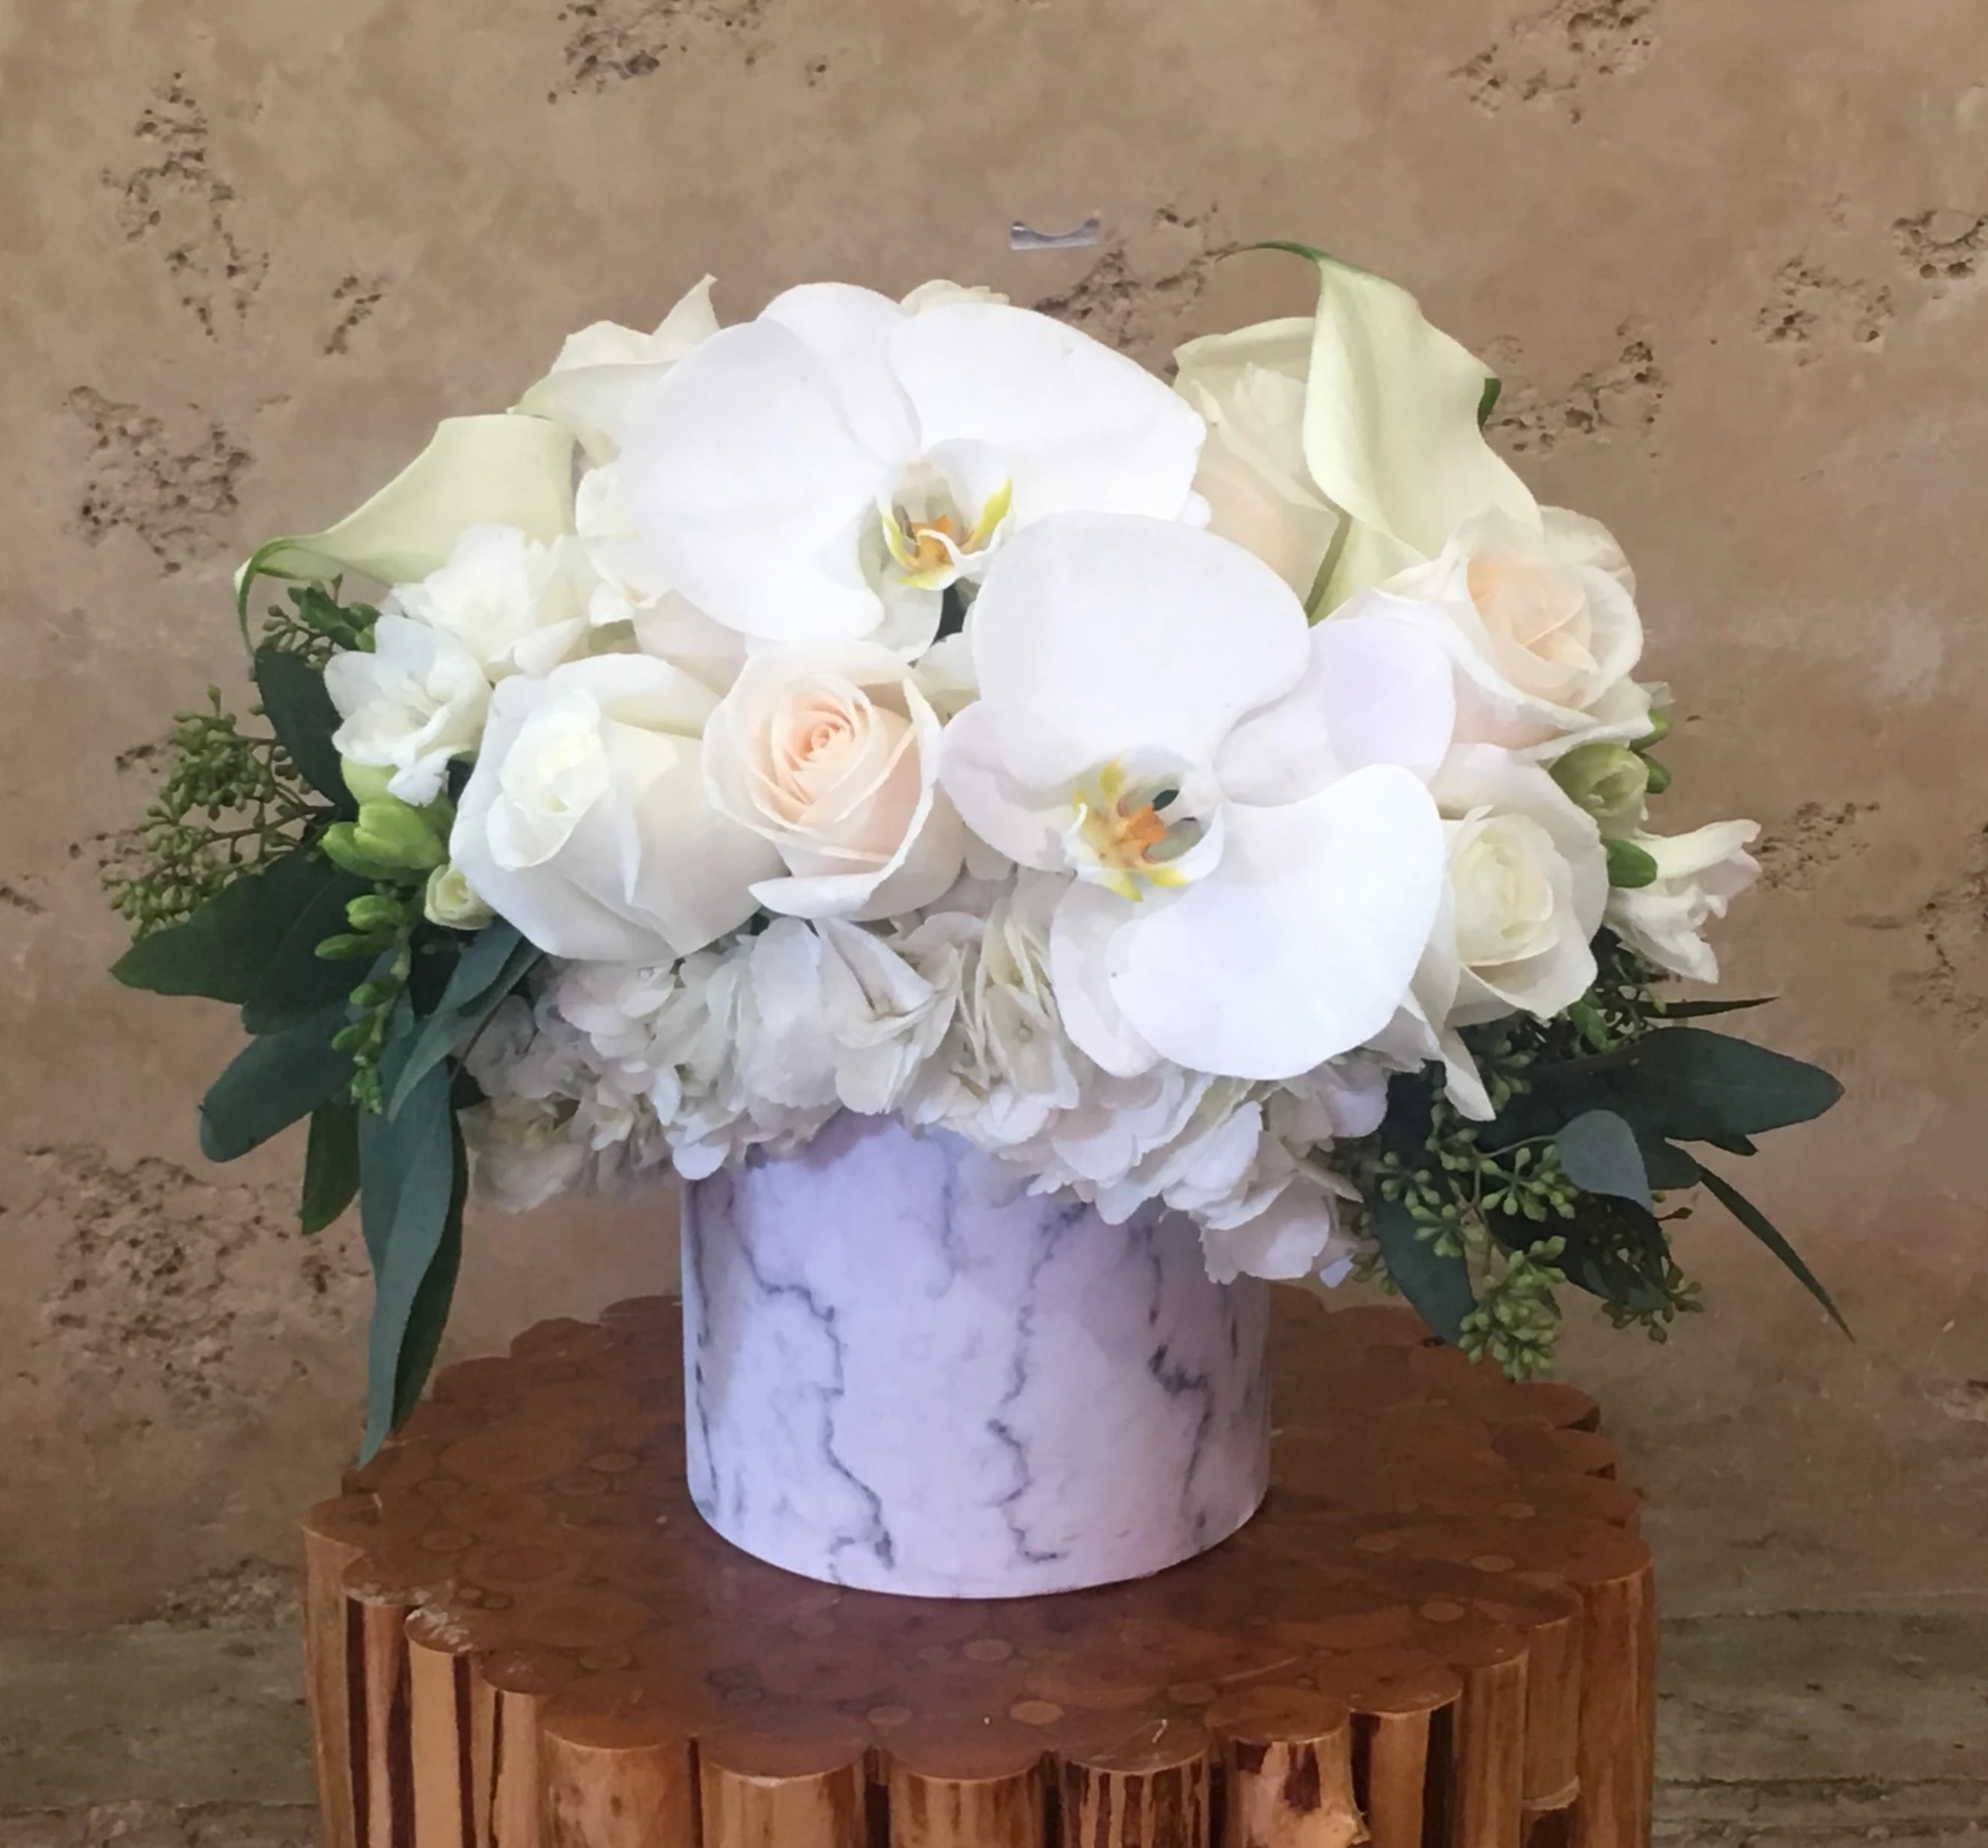 White Orchids and Roses - Green Boxed vase with white orchids, roses and peonies. 